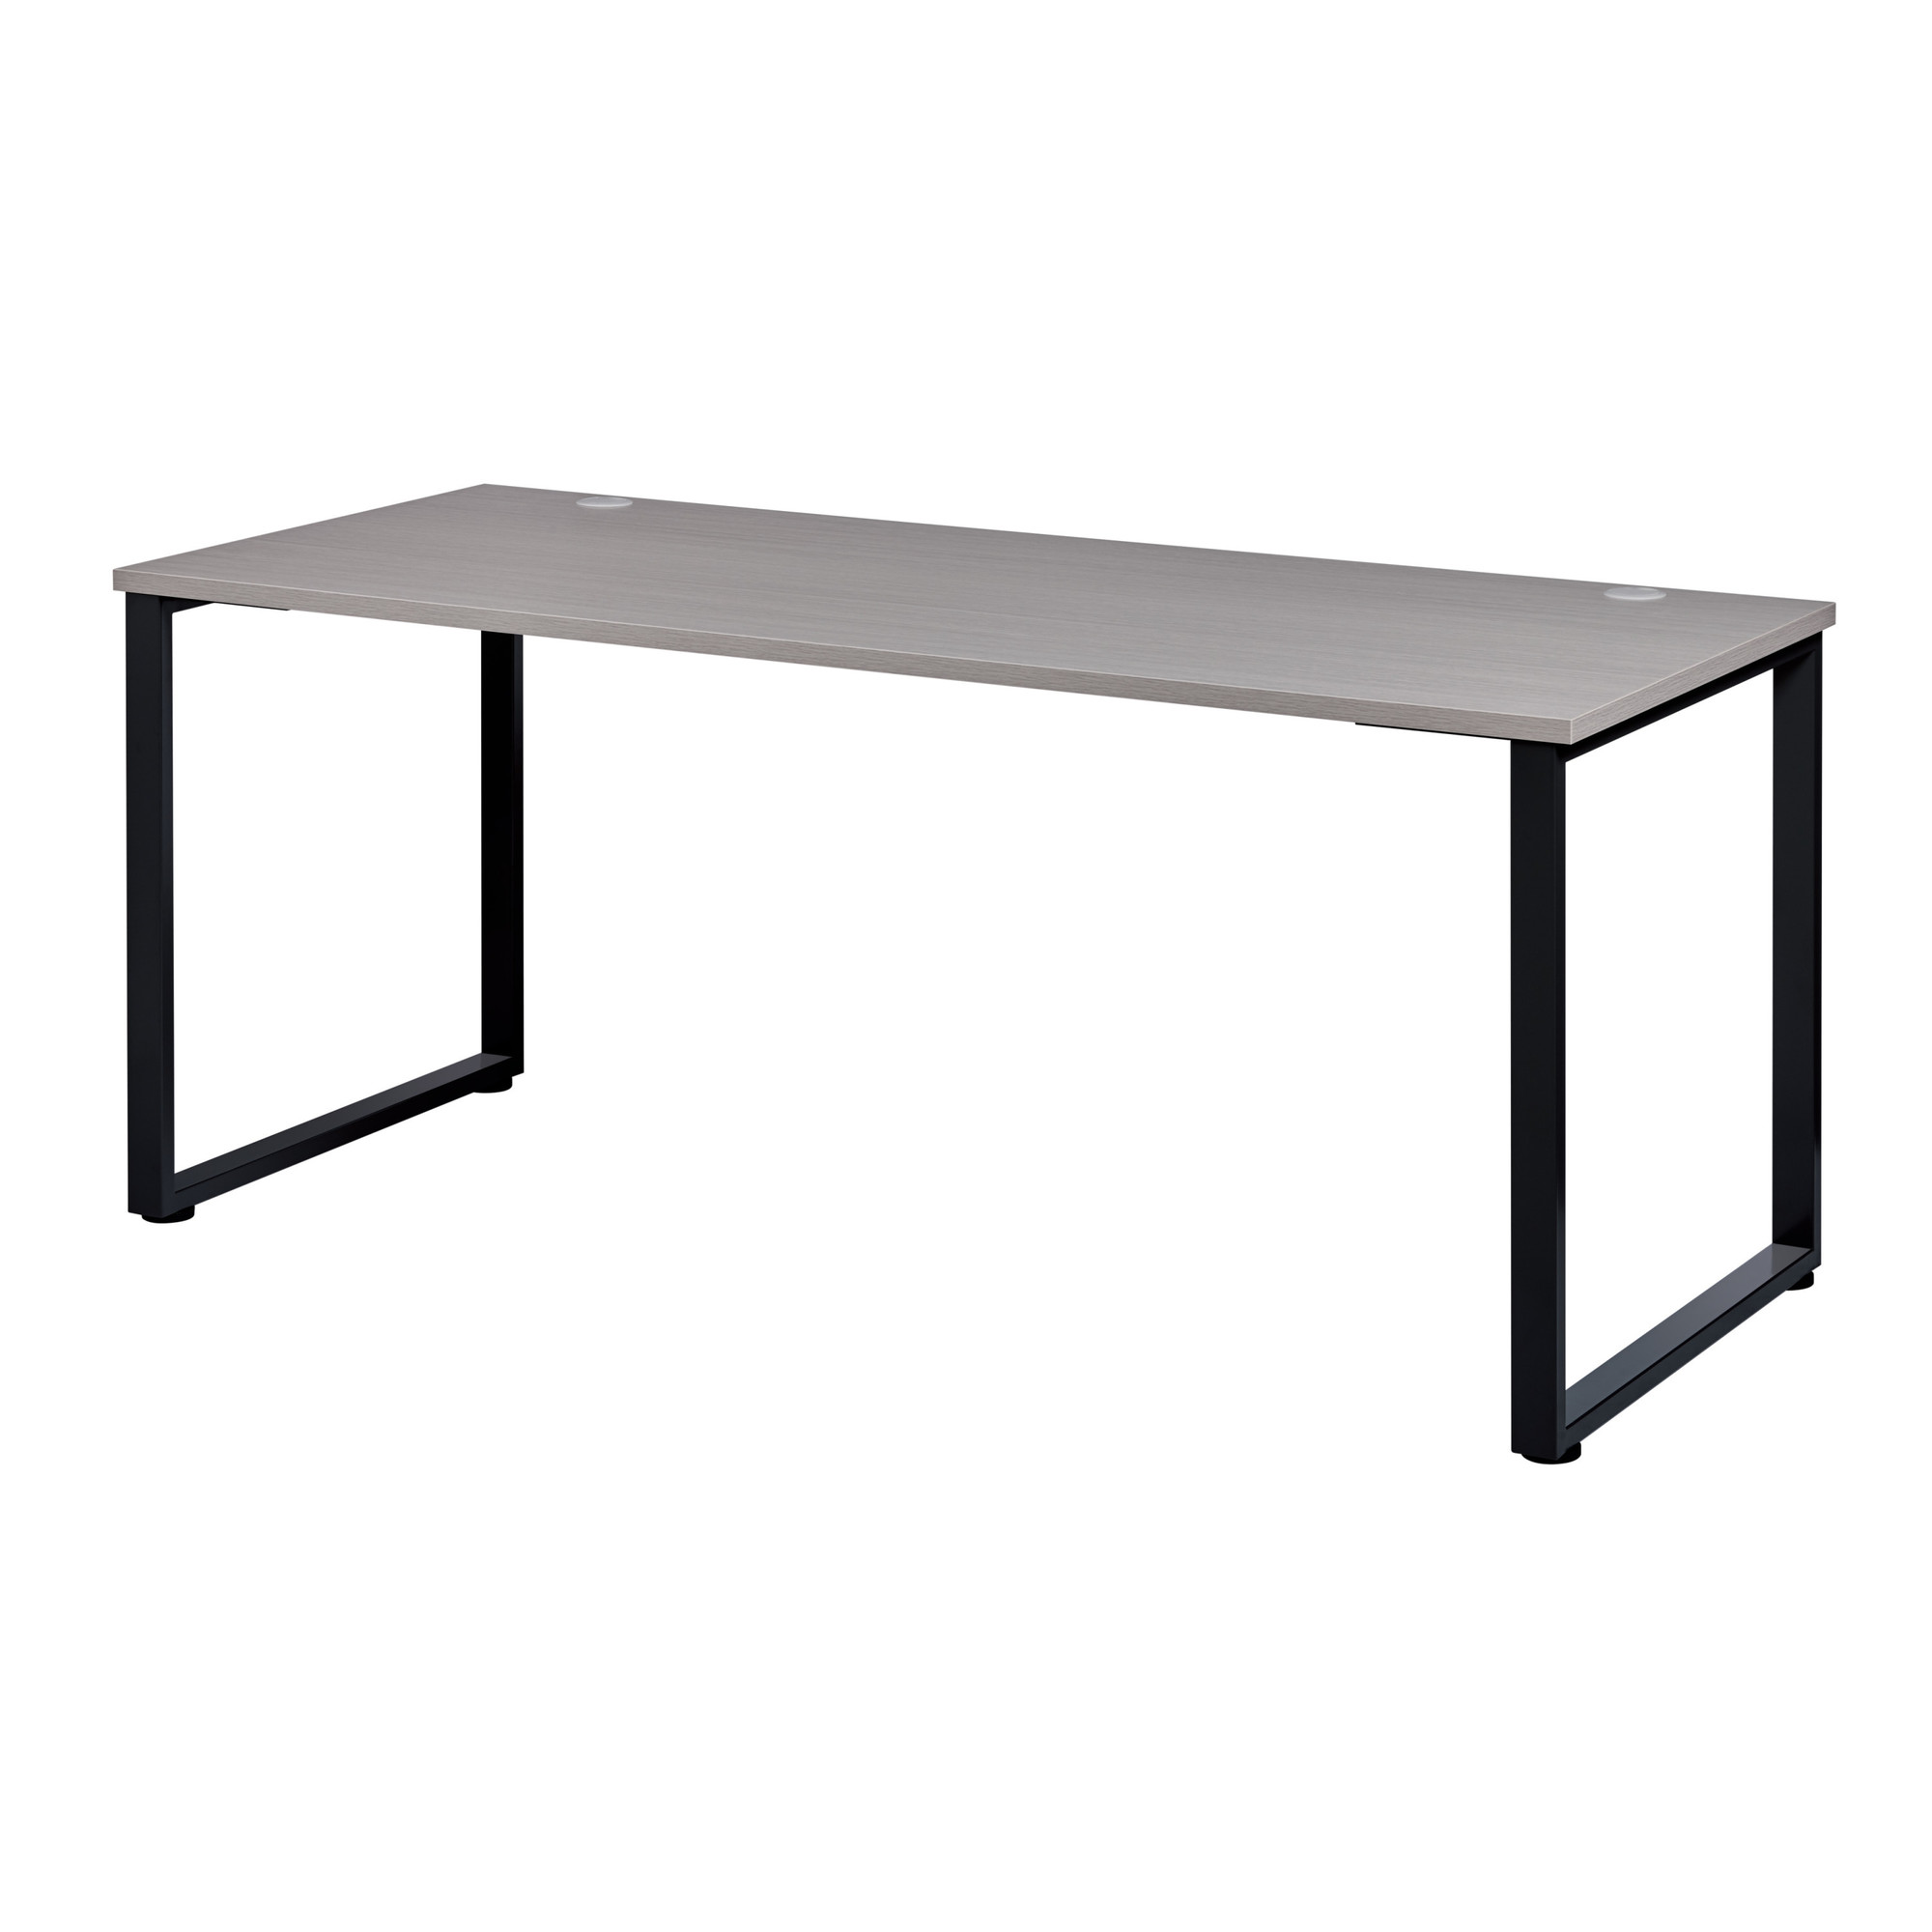 Hirsh Industries, Office Dimensions Open Desk with O-leg, Width 70.9 in, Height 29.9 in, Depth 23.6 in, Model 24780